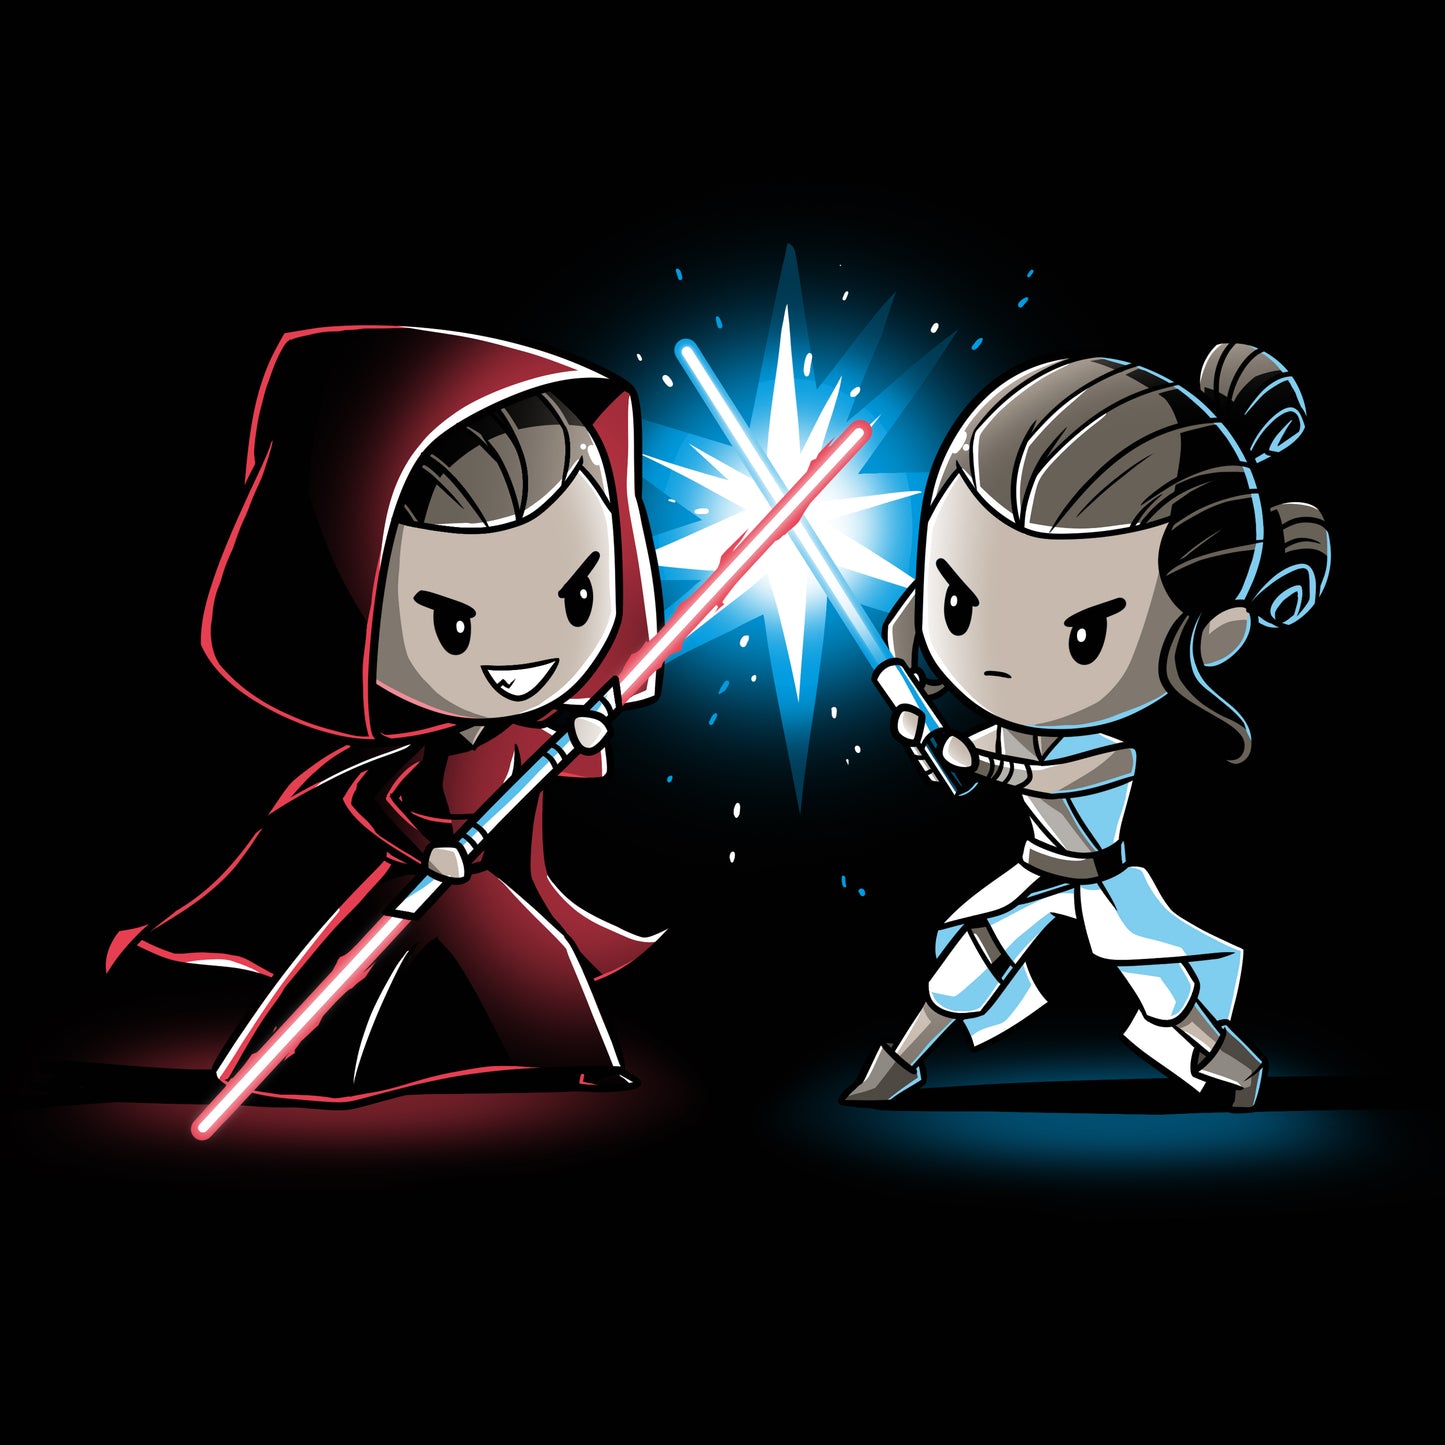 Officially licensed Star Wars Lightsaber Duel (Rey) featuring Rey and Kylo Ren.